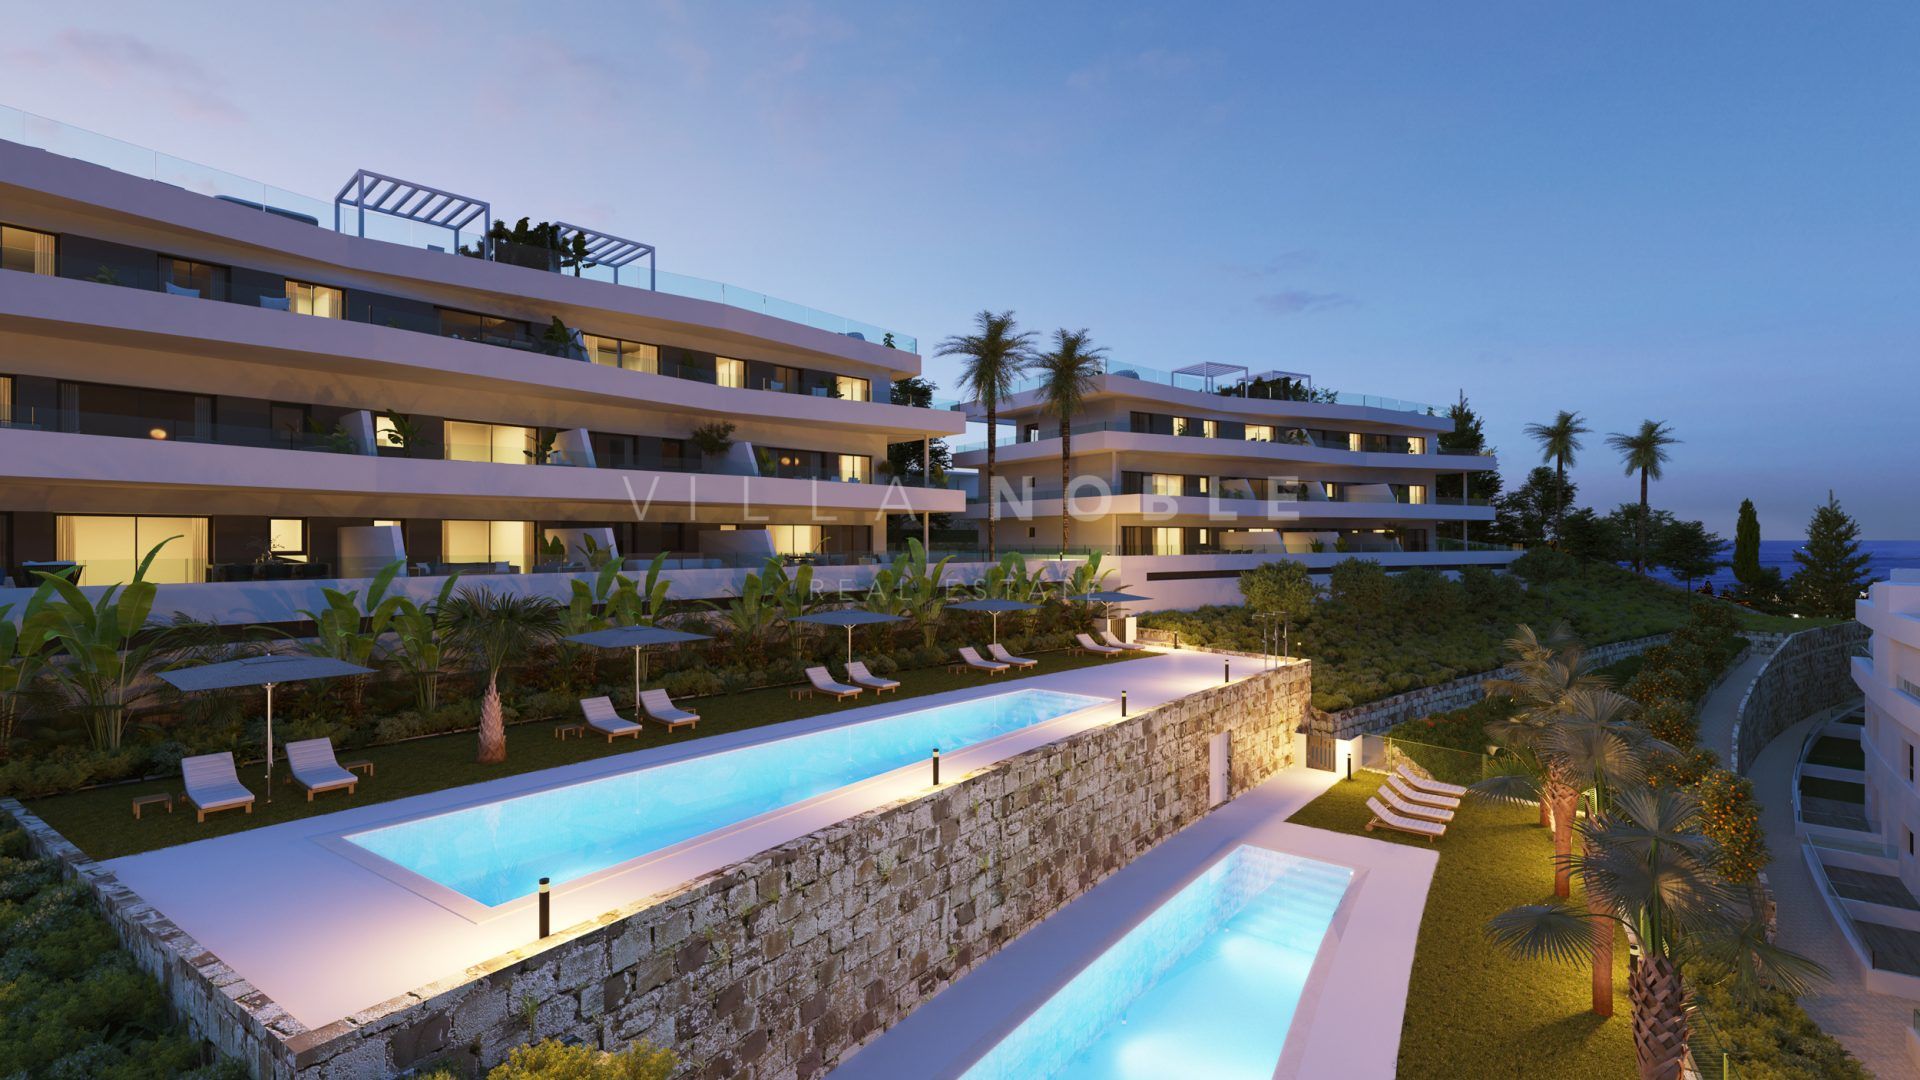 Last units for sale, ready to move in! New development close to amenities in Estepona